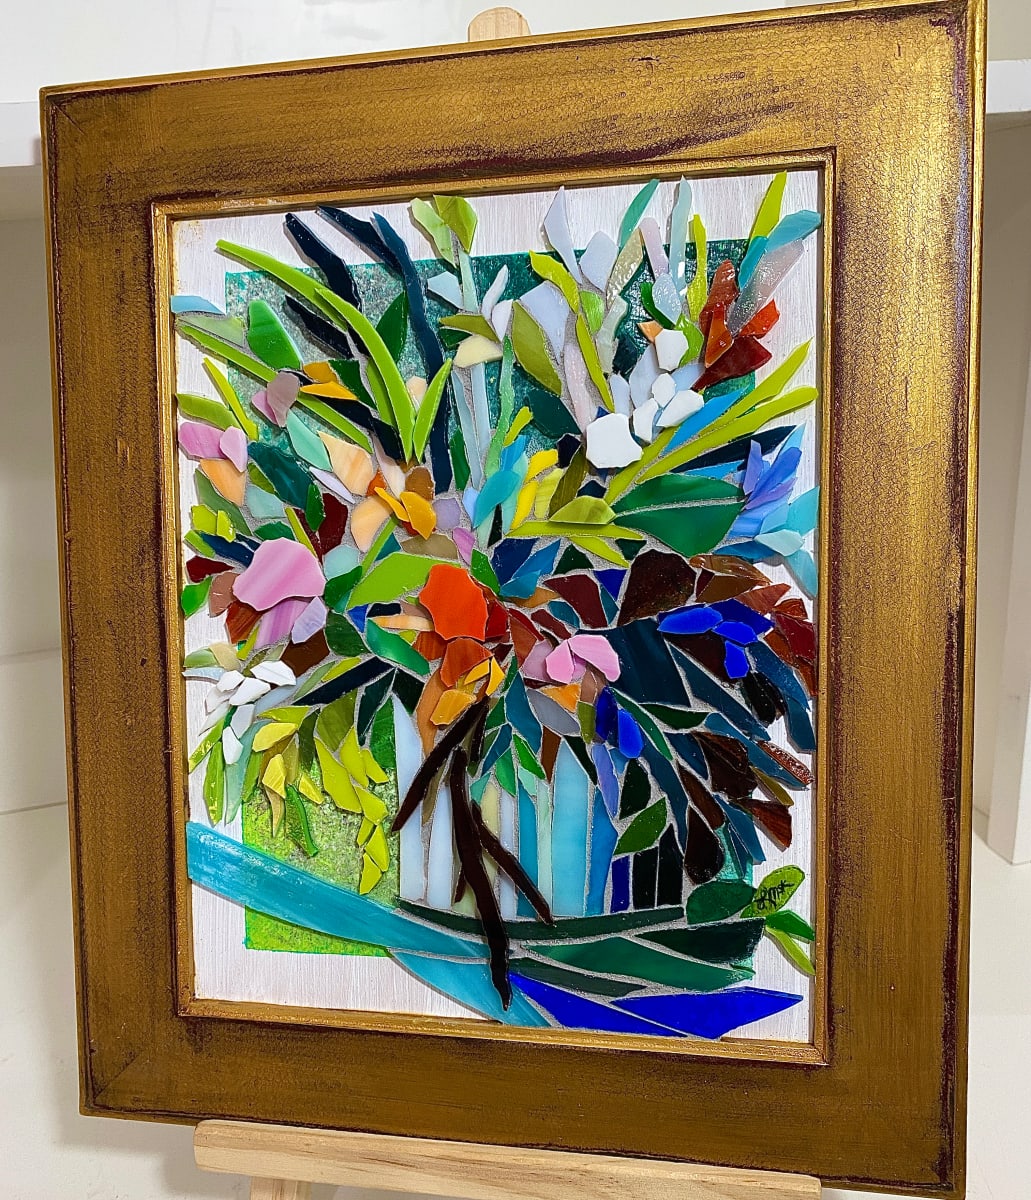 Already There by Laura McKellar  Image: An abstract bouquet in layered stained glass